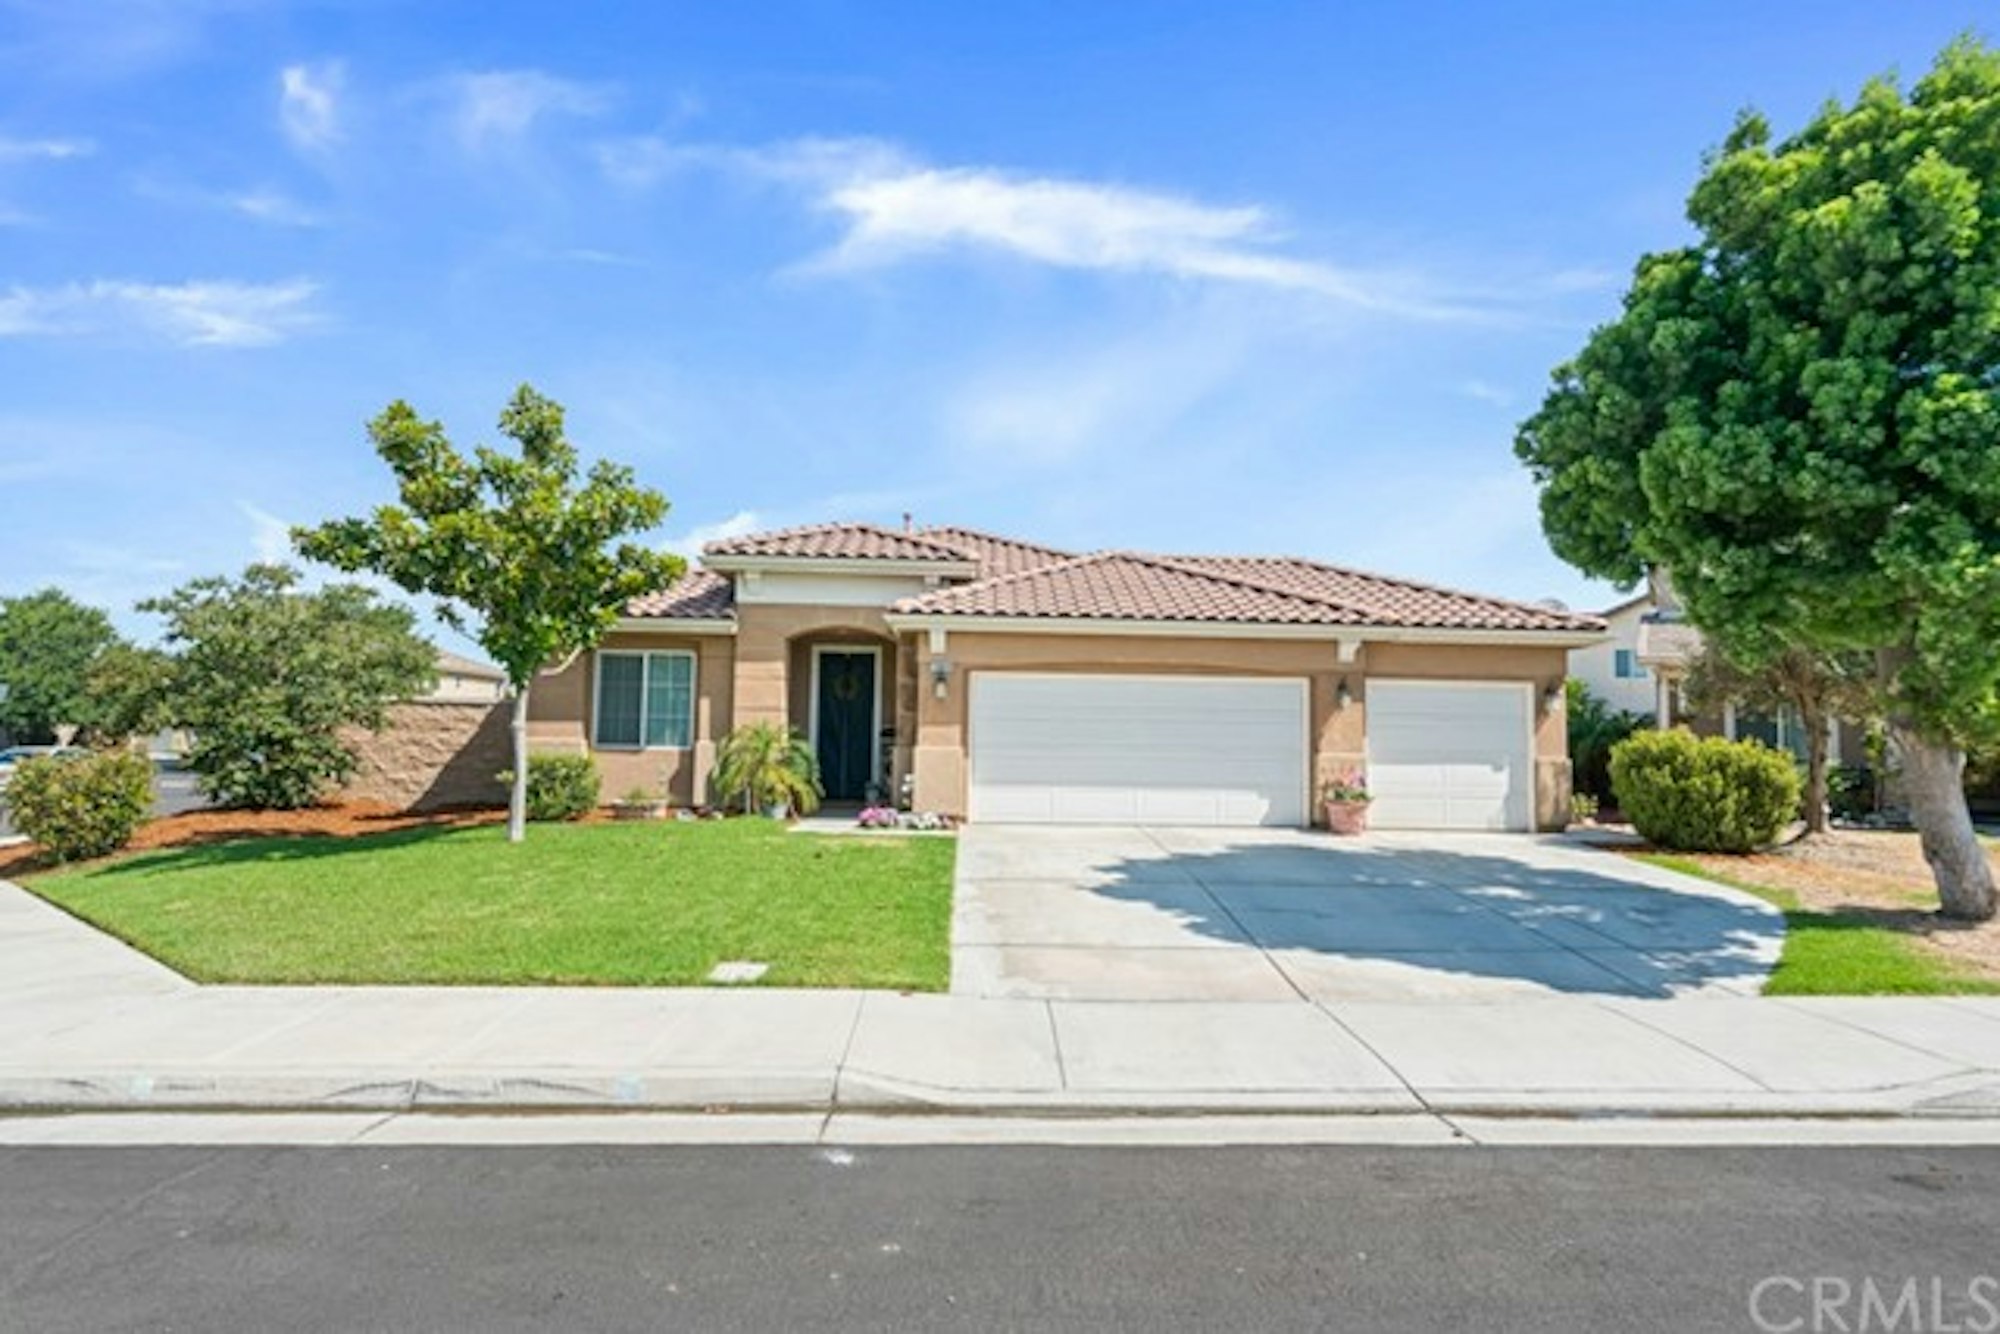 Photo 1 of 36 - 12850 Mare Meadows Ct, Eastvale, CA 92880